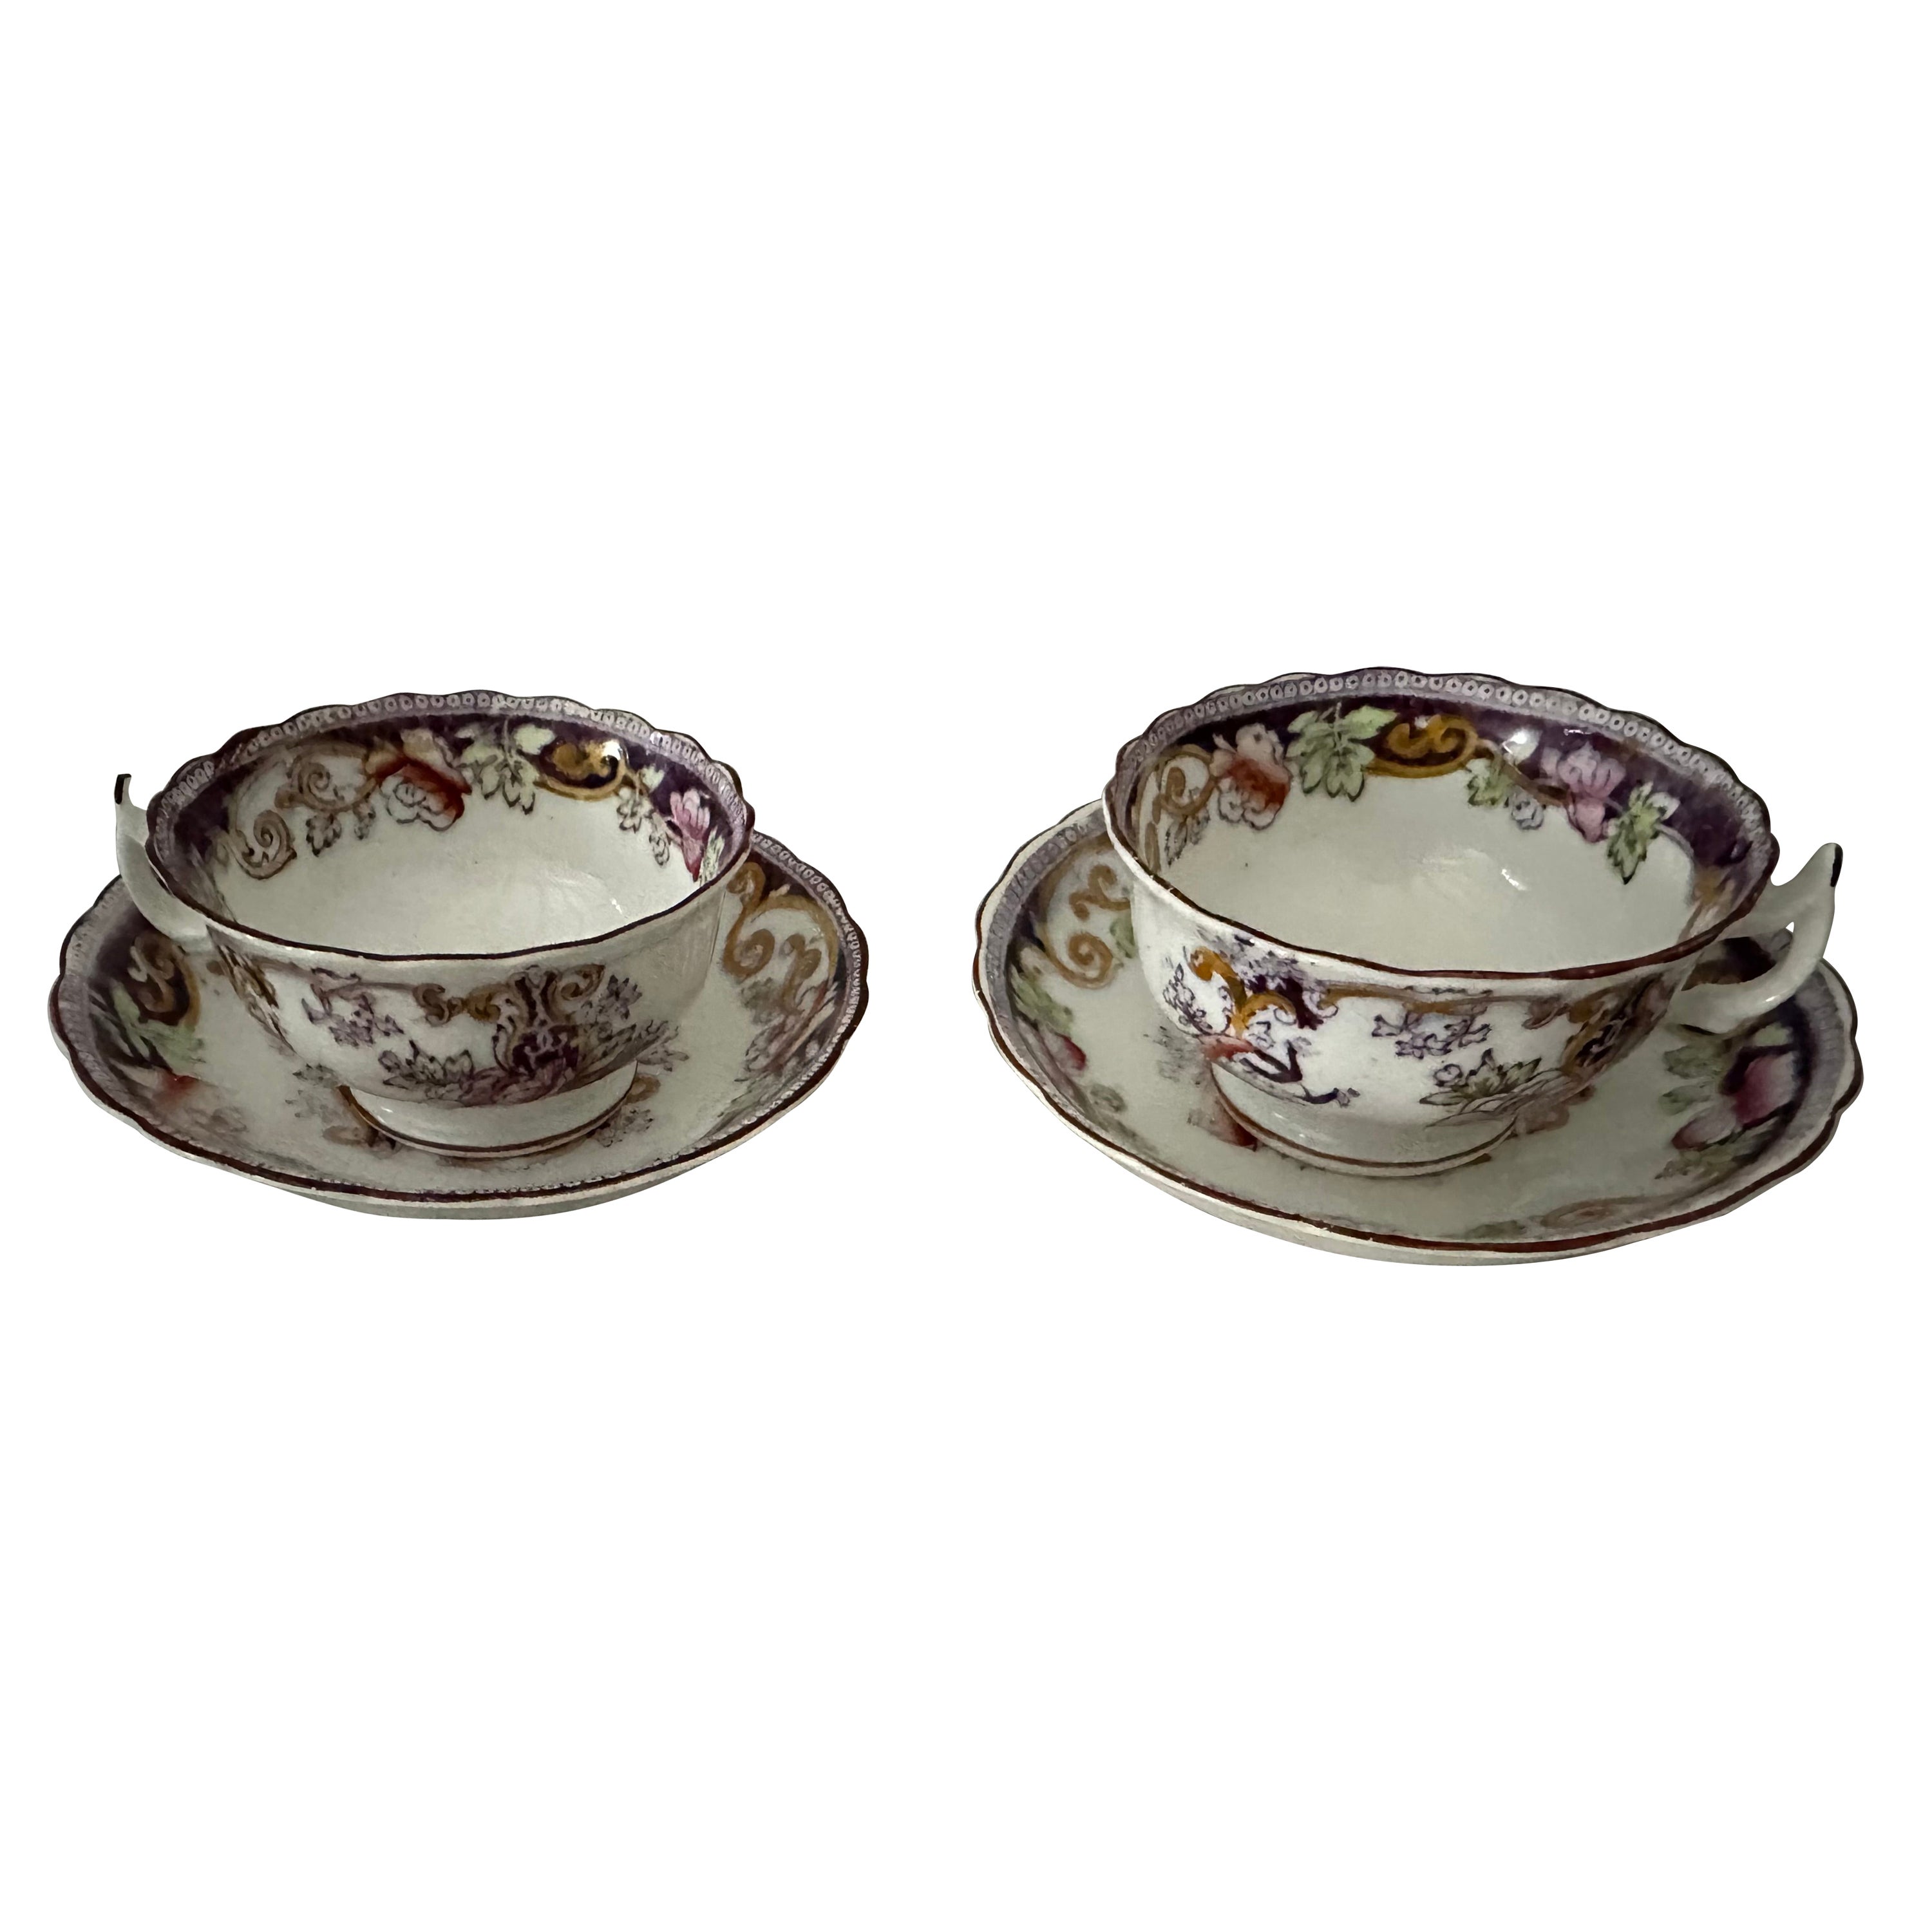 Pair of Antique 1890 English Bone China Tea Cup and Saucer Sets For Sale